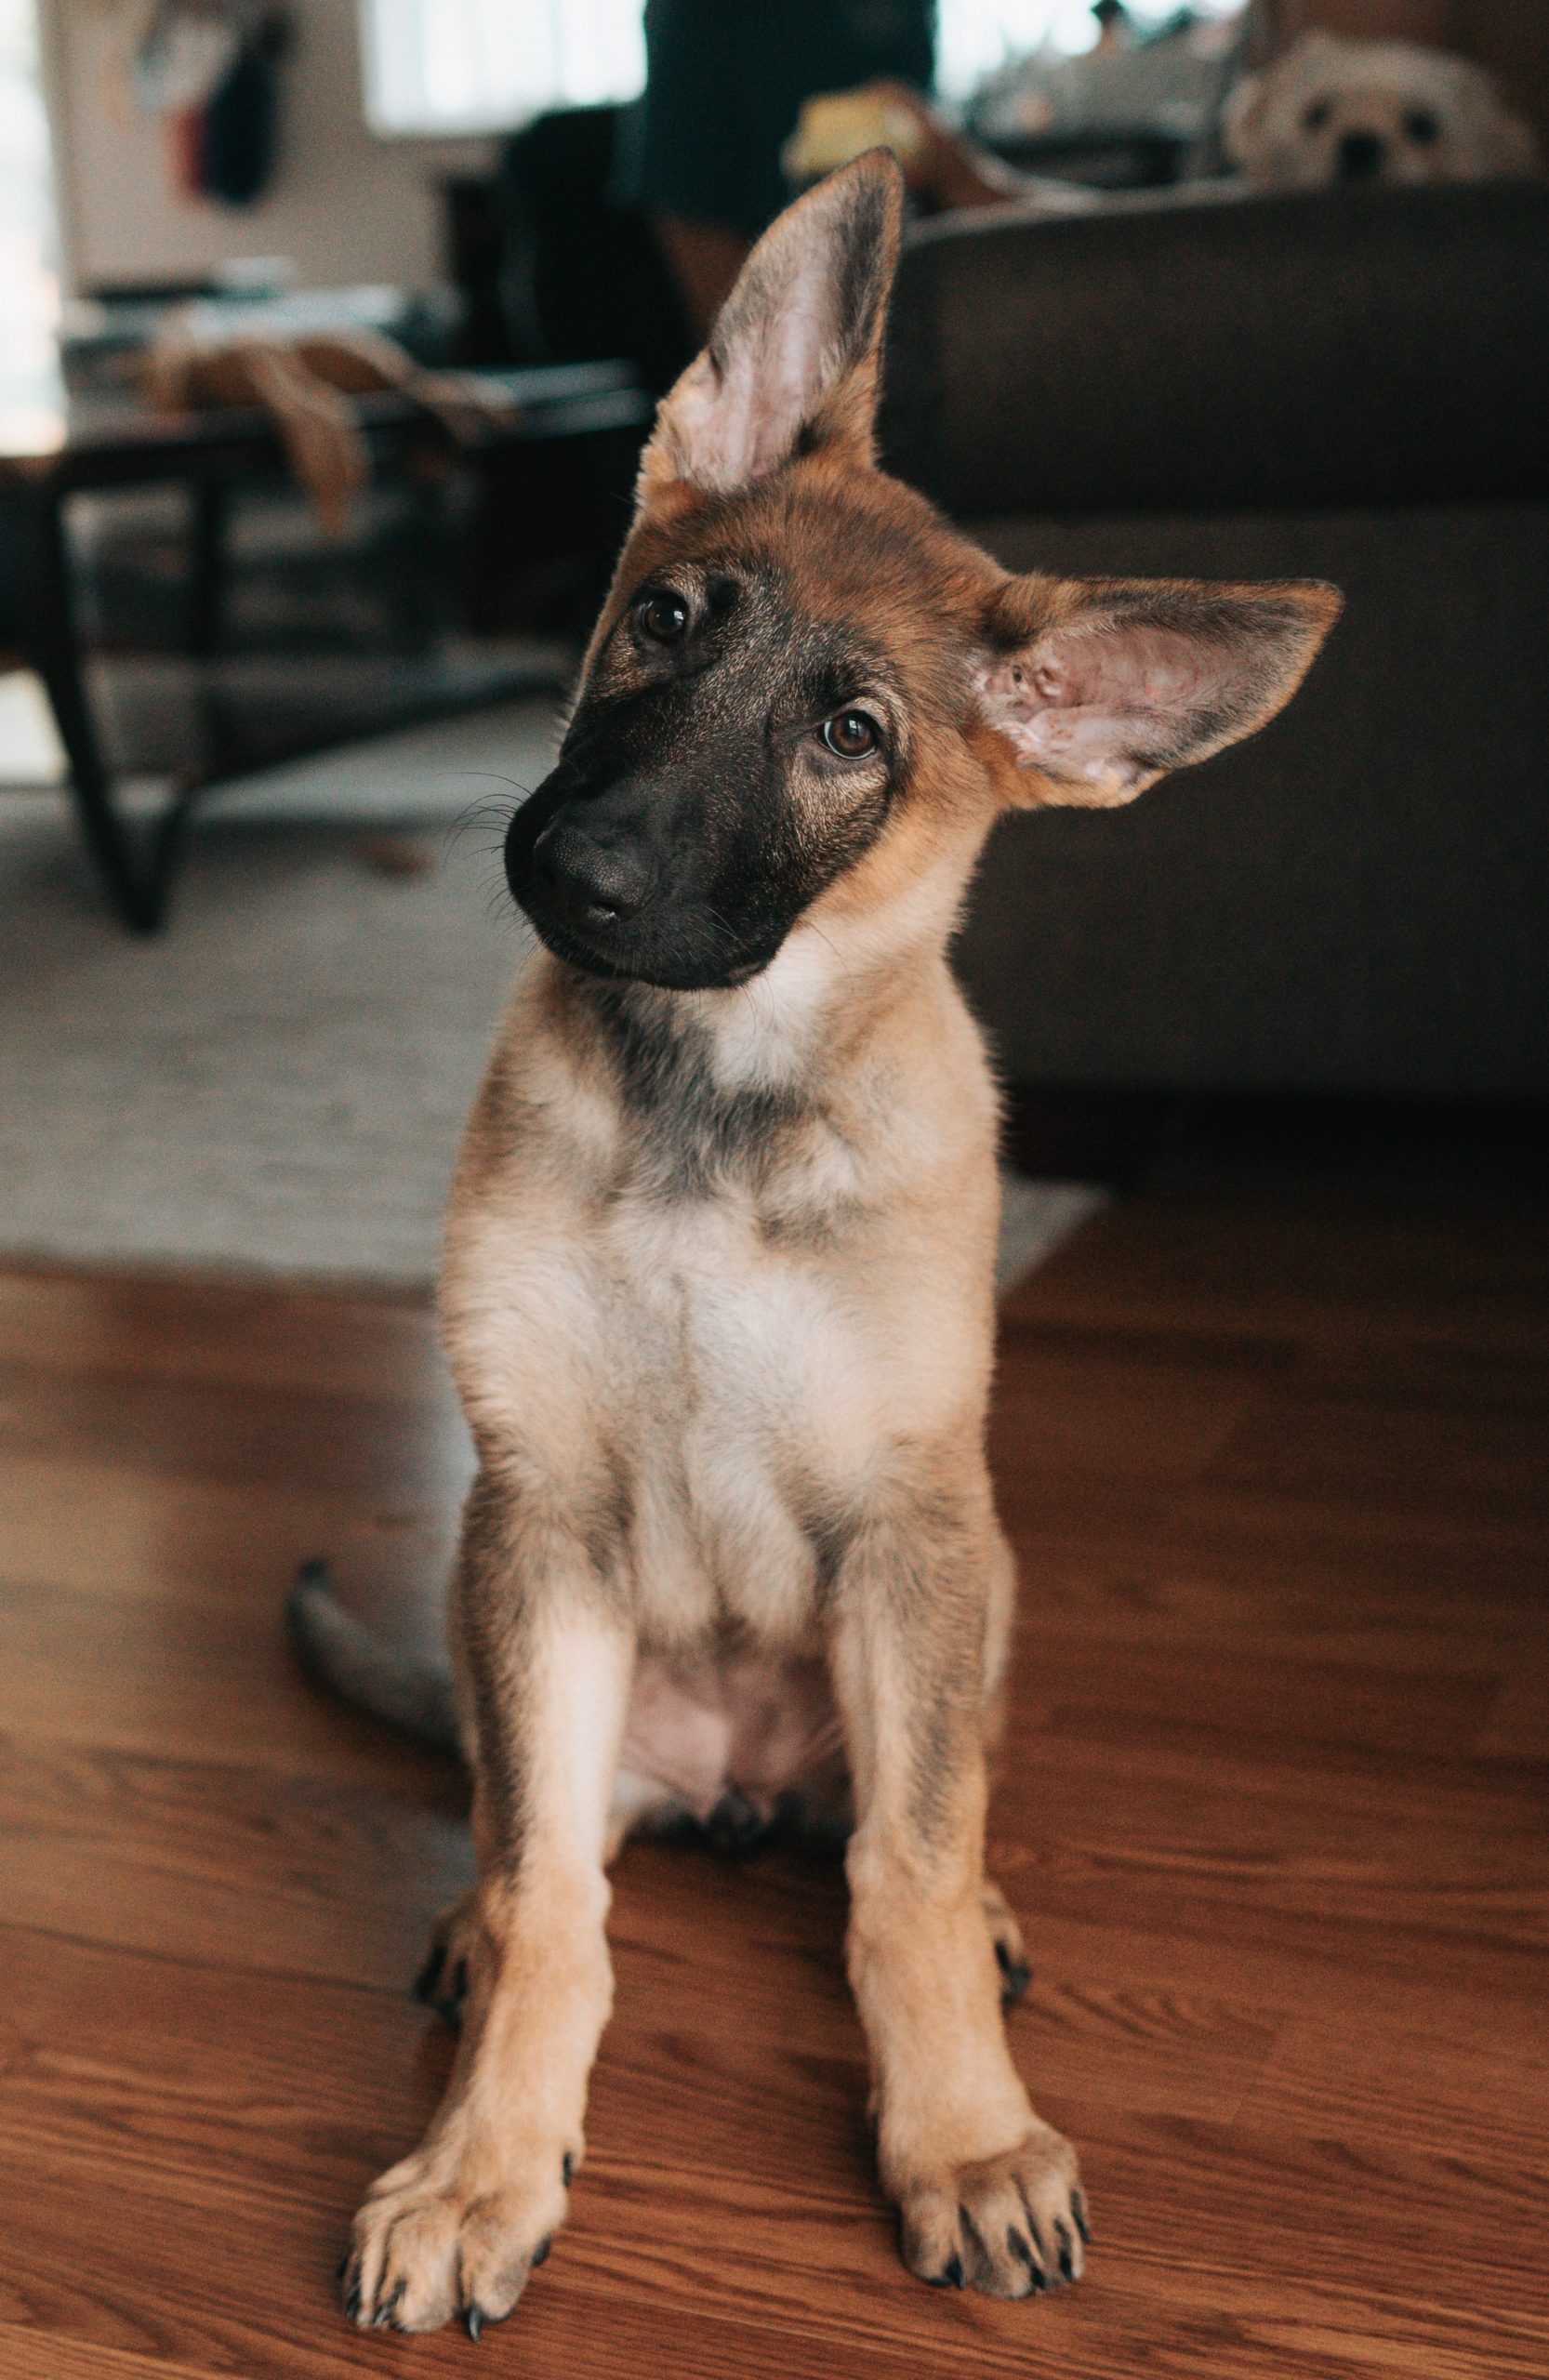 alsatian pup head to one side for commonly confused word pairs